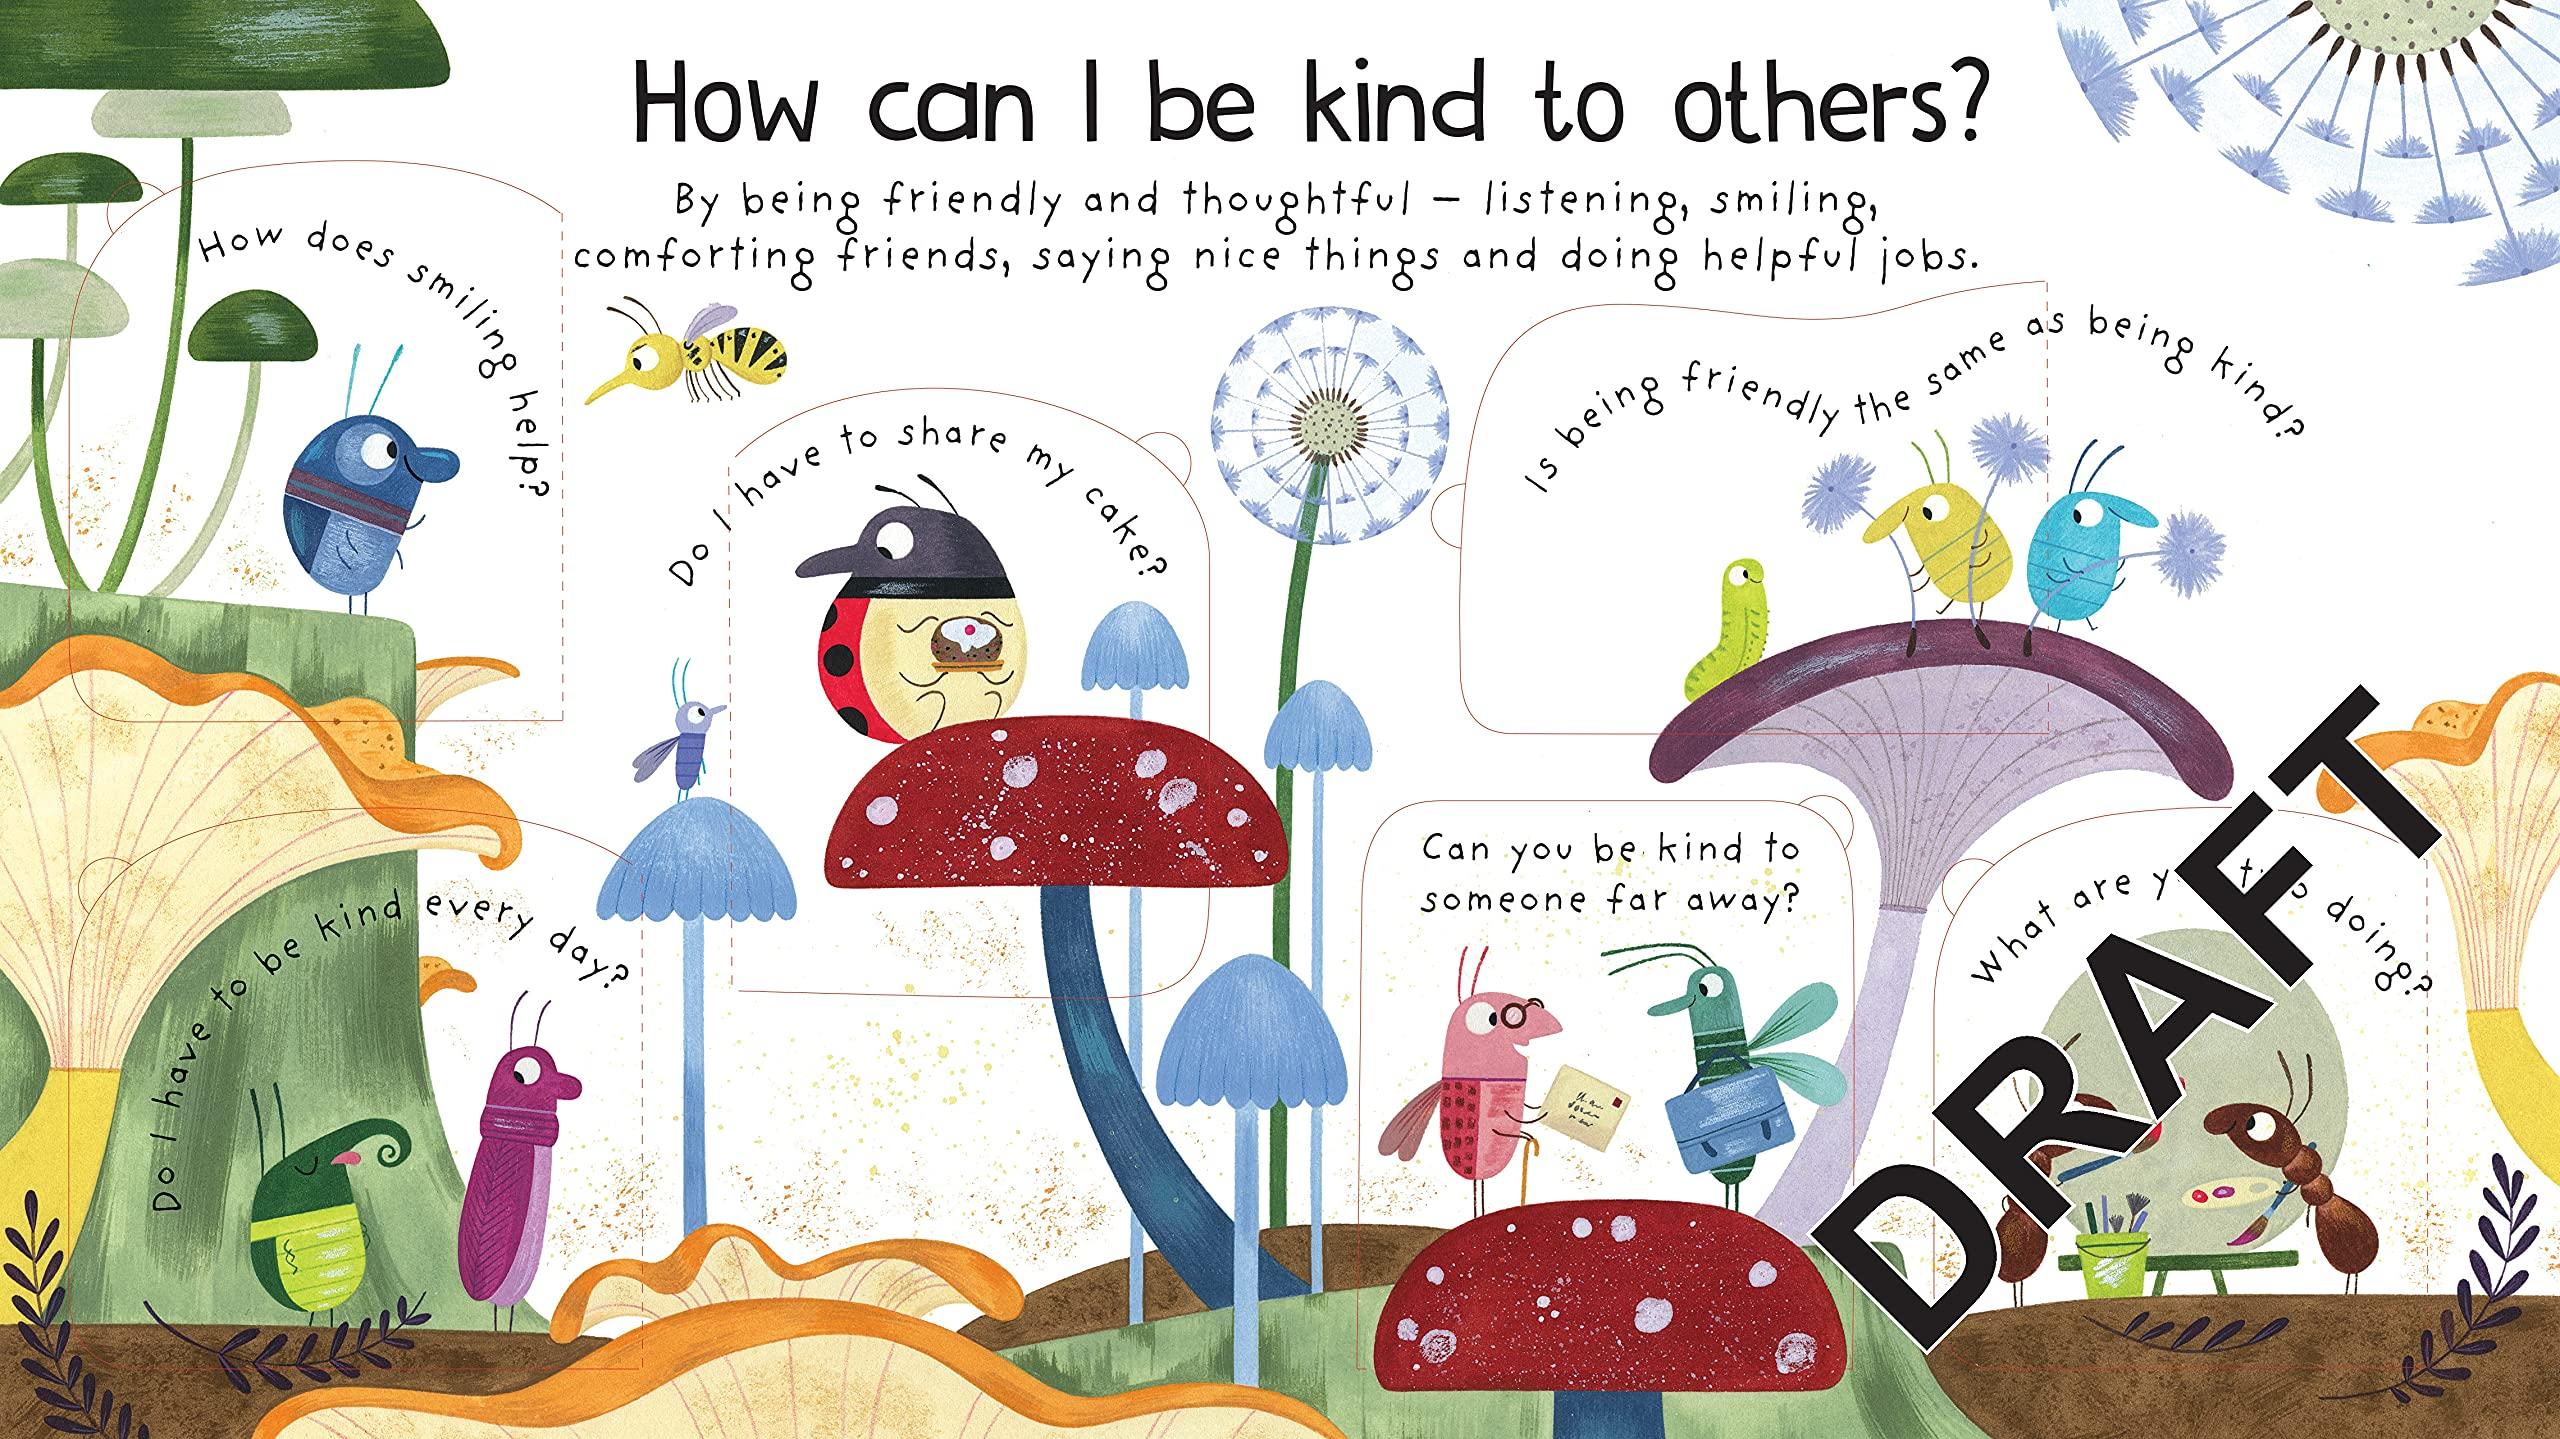 tiếng Anh: How Can I Be Kind